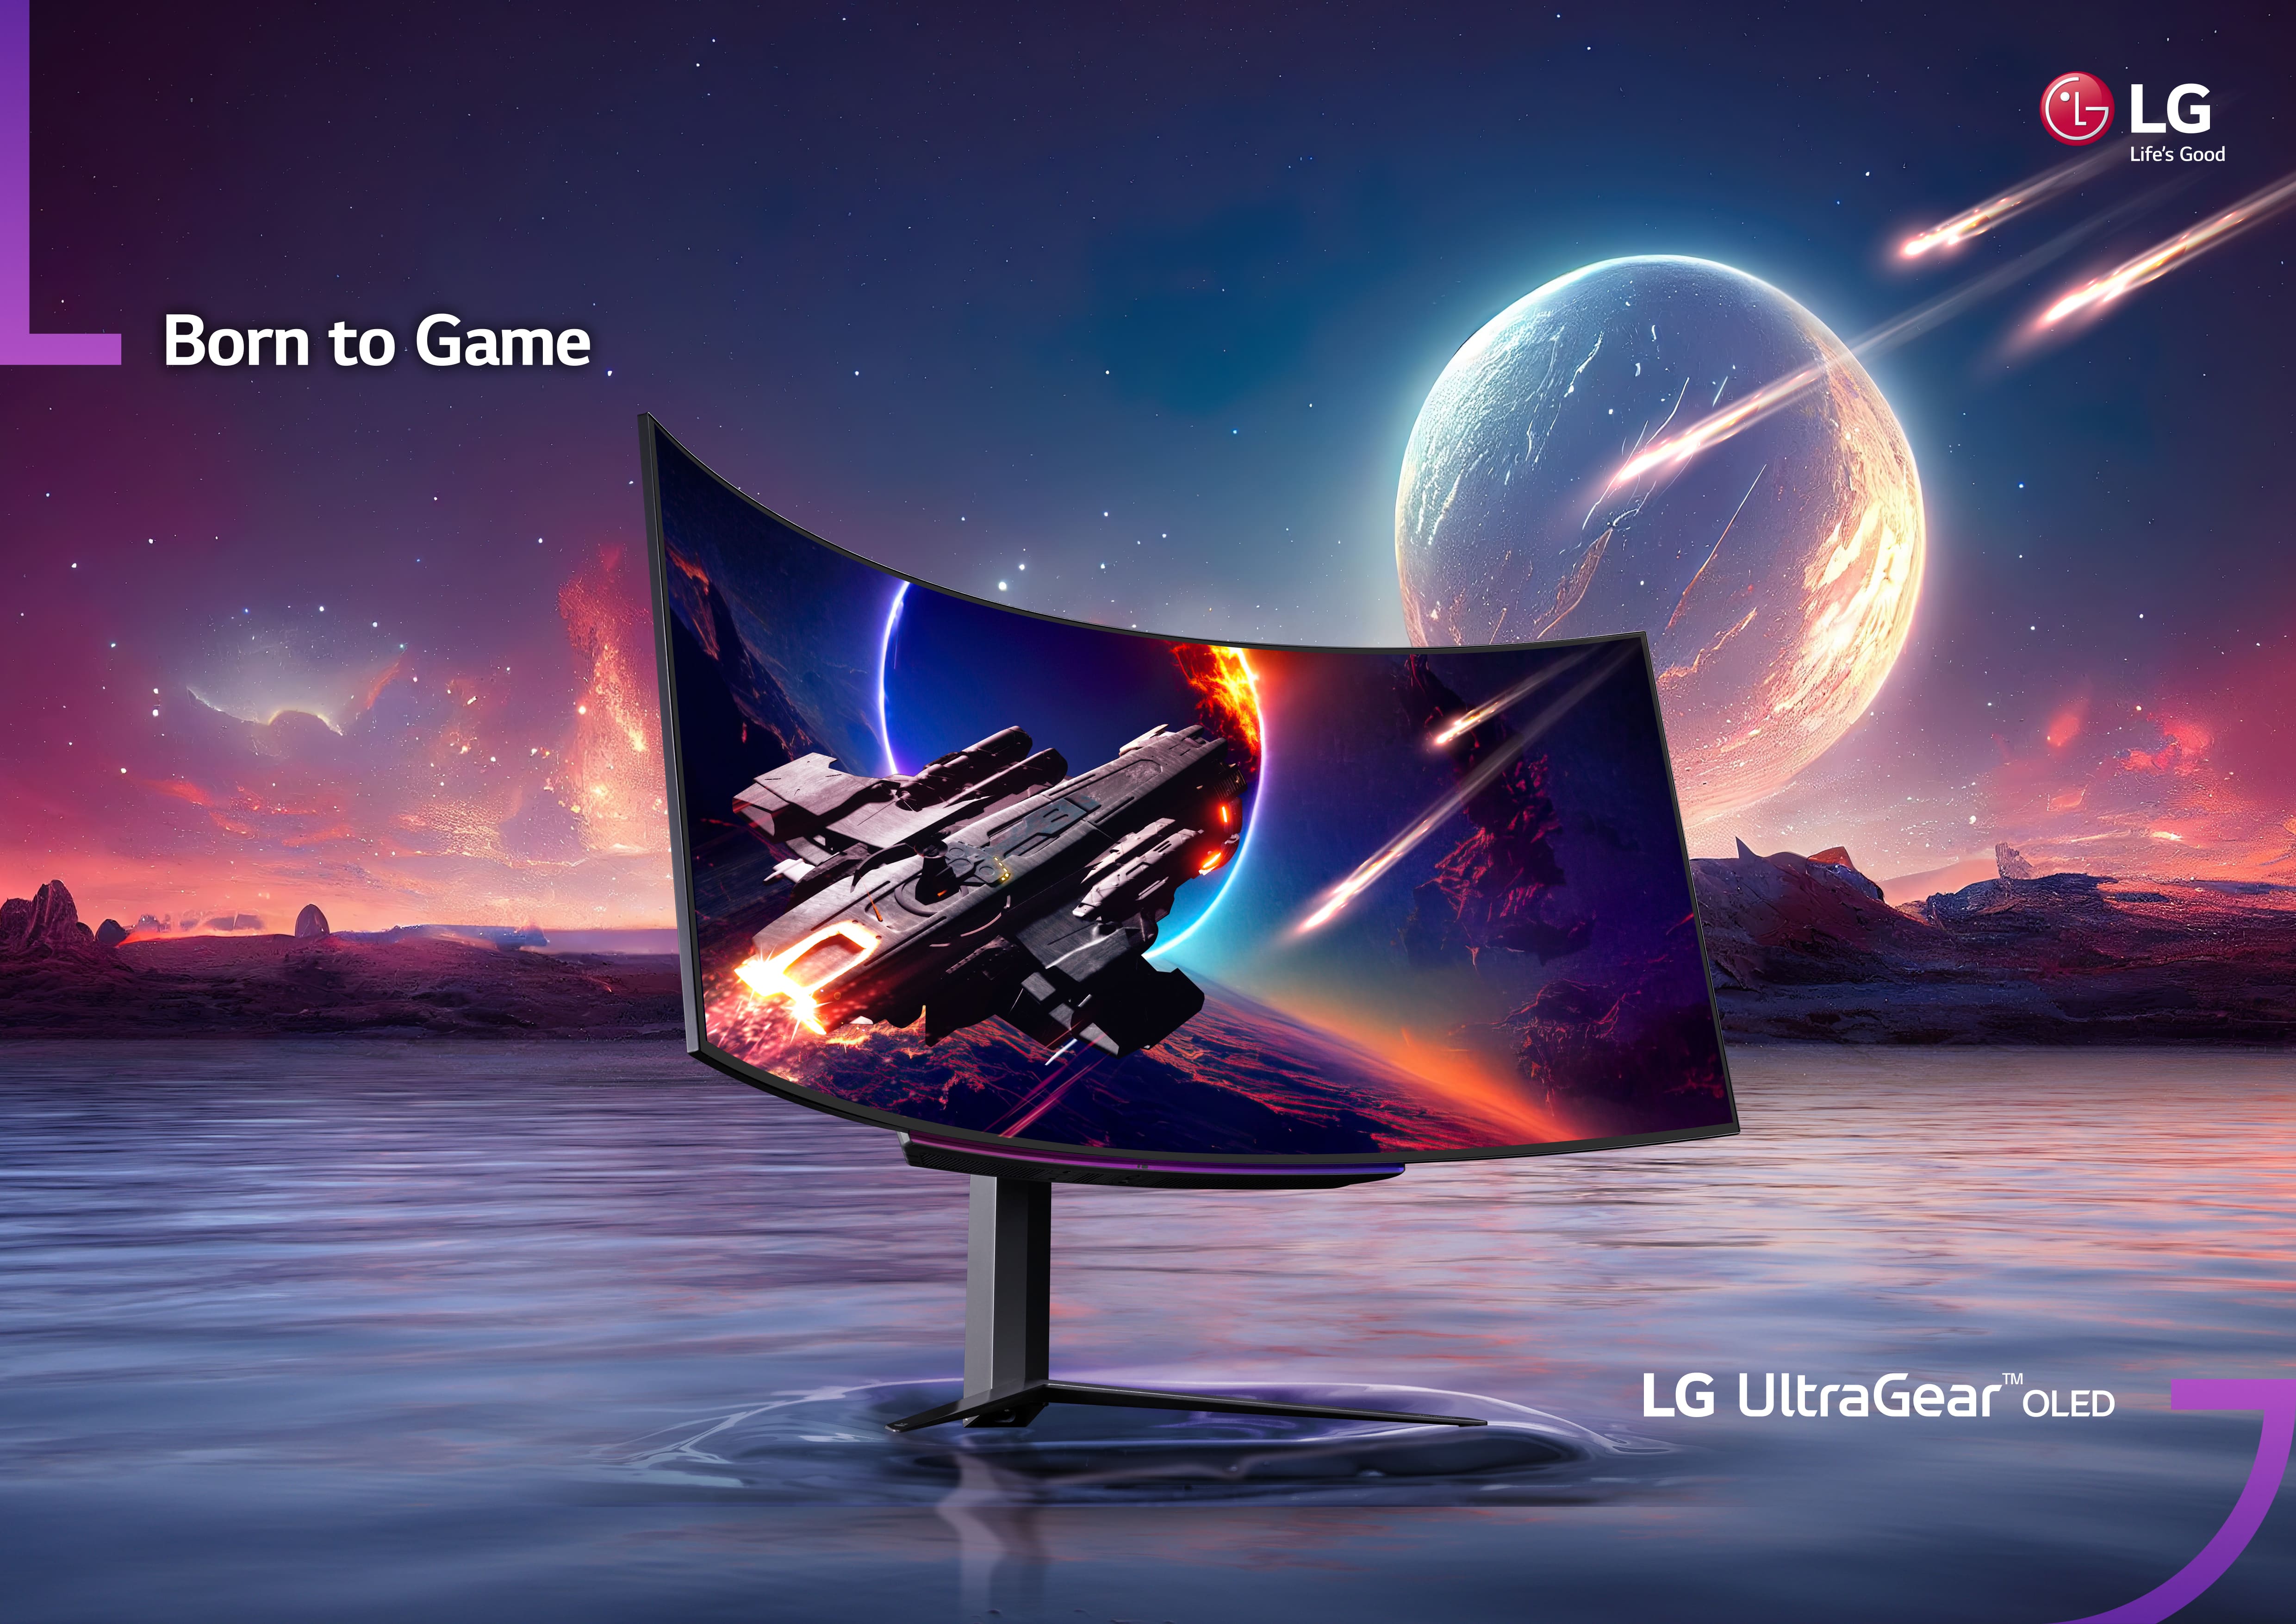 ACTION-FILLED FUN WITH THE LG ULTRAGEAR™ MONITOR FEATURING OLED TECHNOLOGY  - AETOSWire